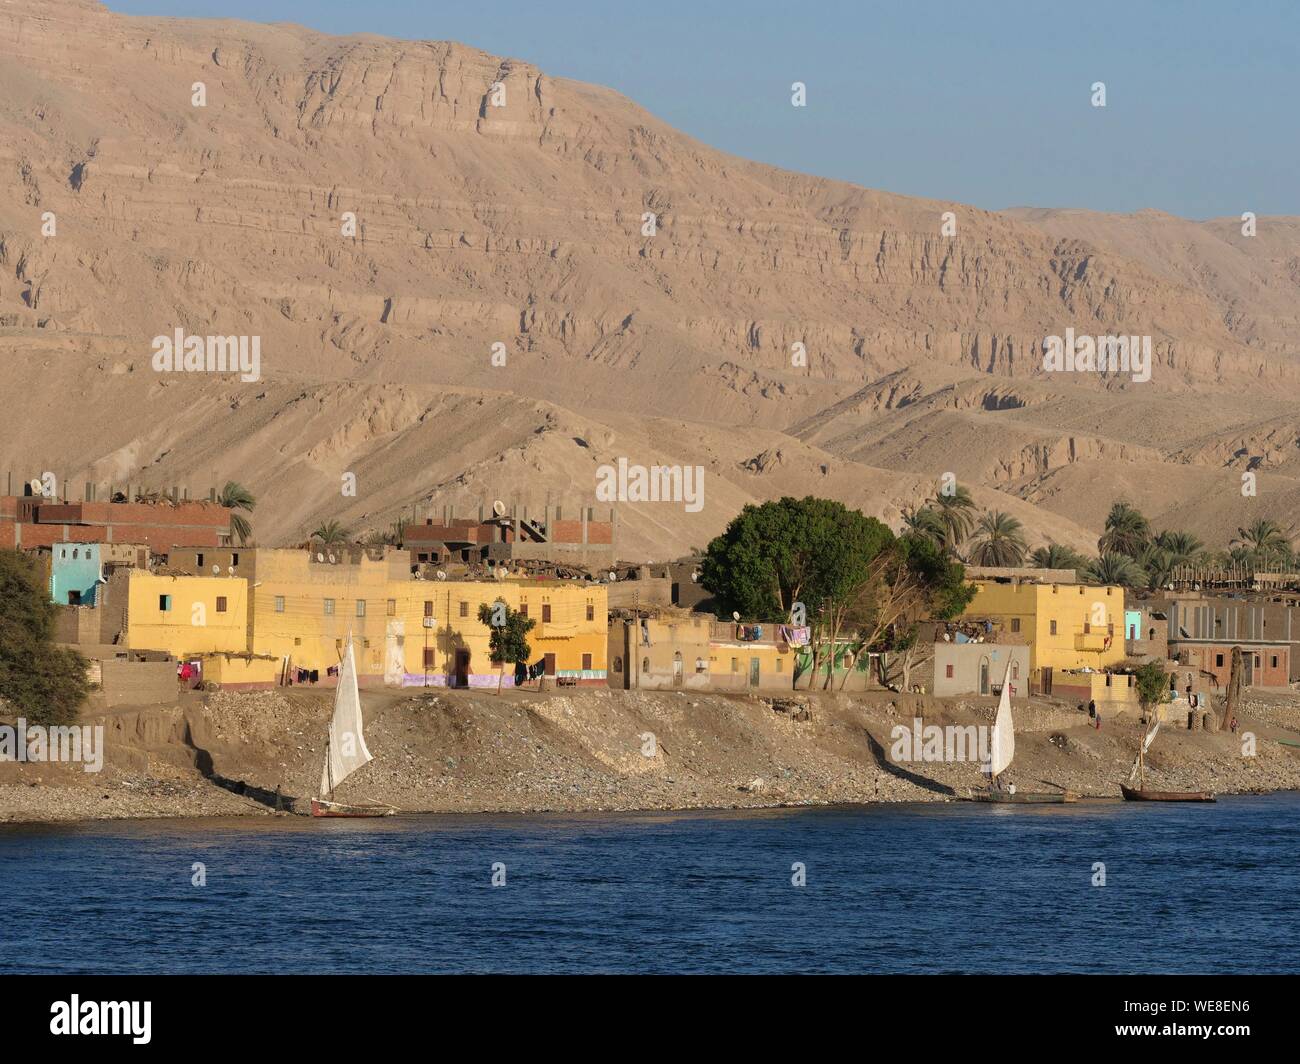 Egypt, Upper Egypt, Nile Valley, village on the banks of the Nile seen from a cruise ship sailing on the Nile at Edfu Stock Photo